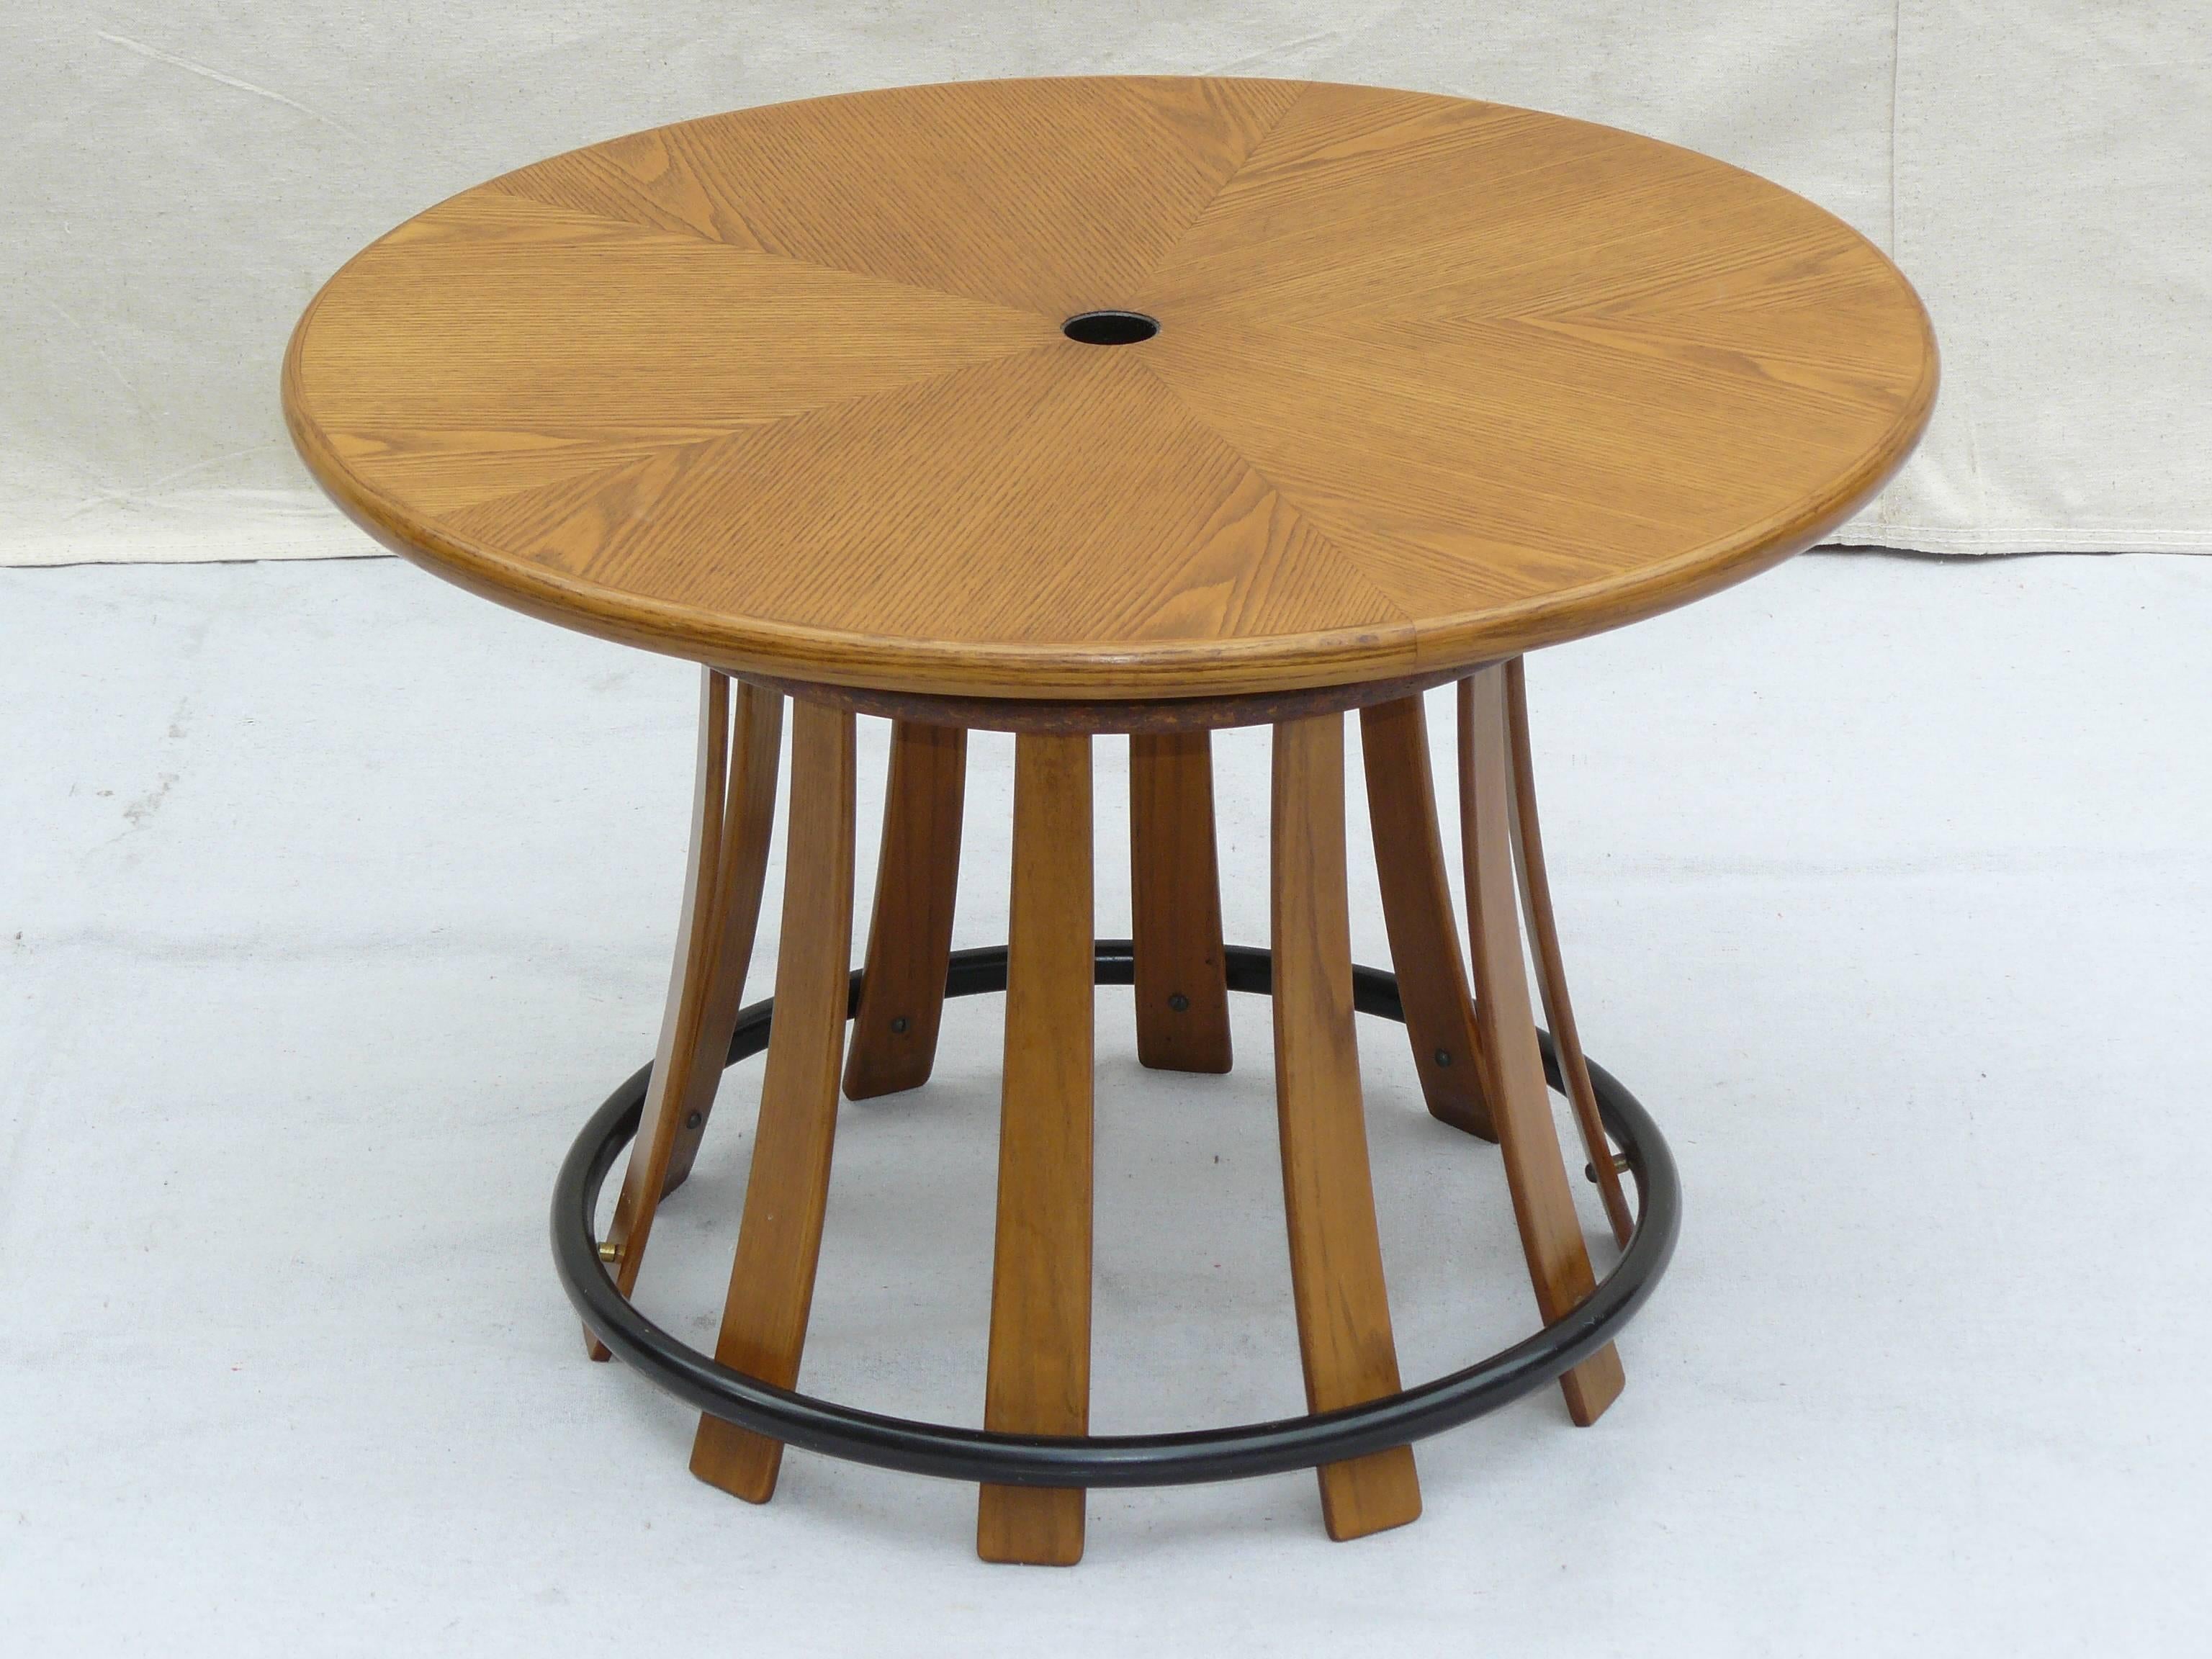 1960s Edward Wormley Dunbar Toadstool Table

Book matched Ash veneer top and bentwood Ash legs with espresso enameled metal ring and brass accent spacers. Big 